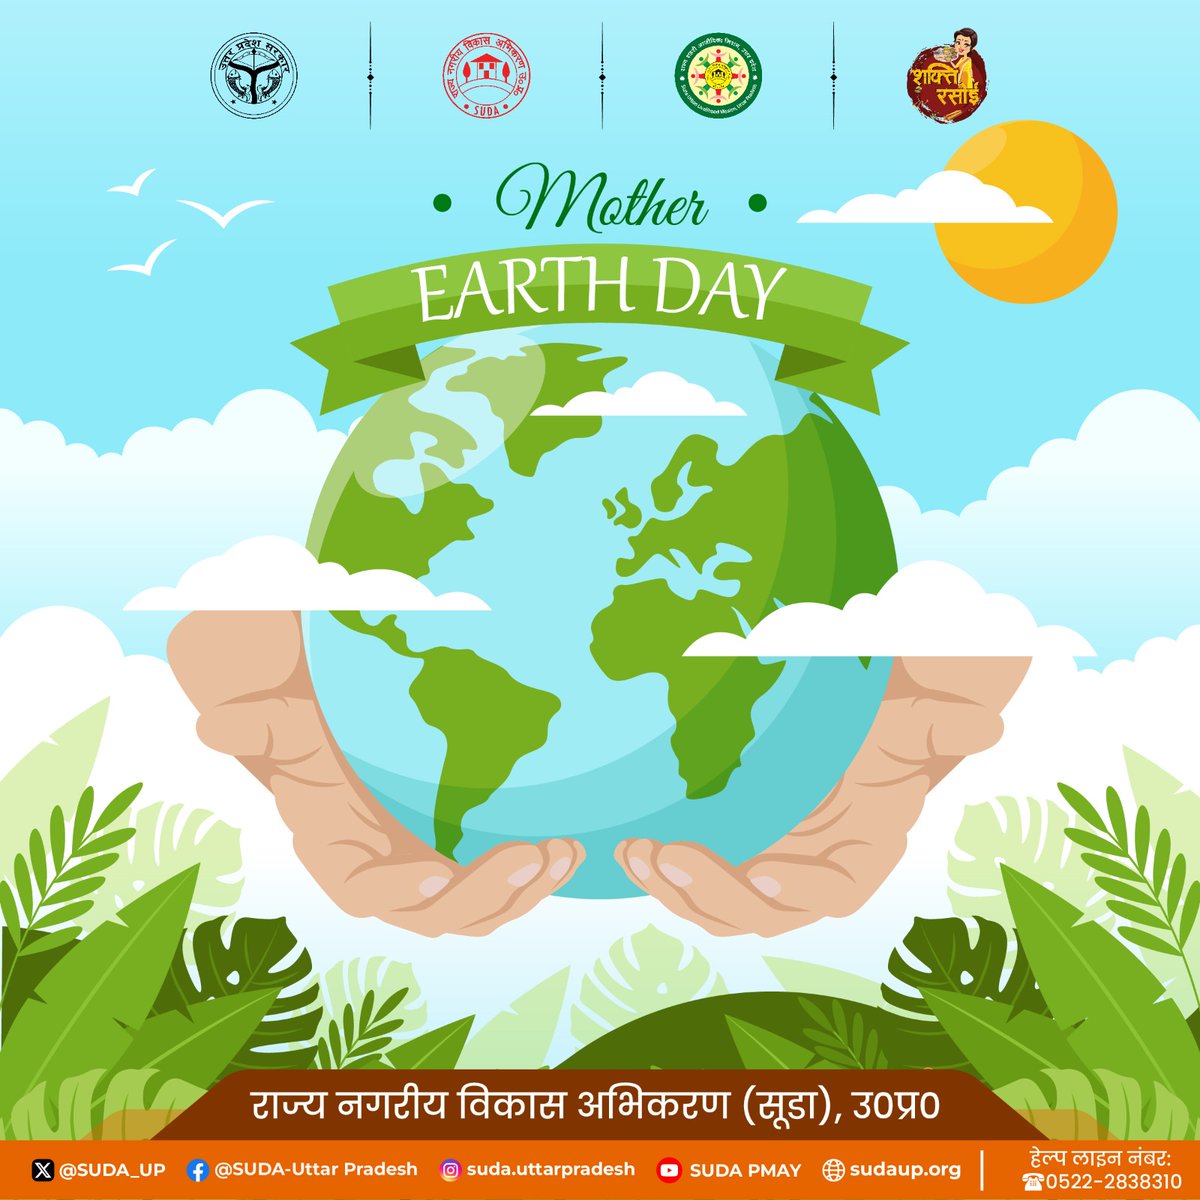 We are all guardians of Mother Earth, and it is our duty to care for her and protect her from harm. 
– Amer Arat

#Earthday #motherearthday🌍 #savetheplanetearth #planttrees🌱#Savetheworld #DAYNULM #UPSUDA